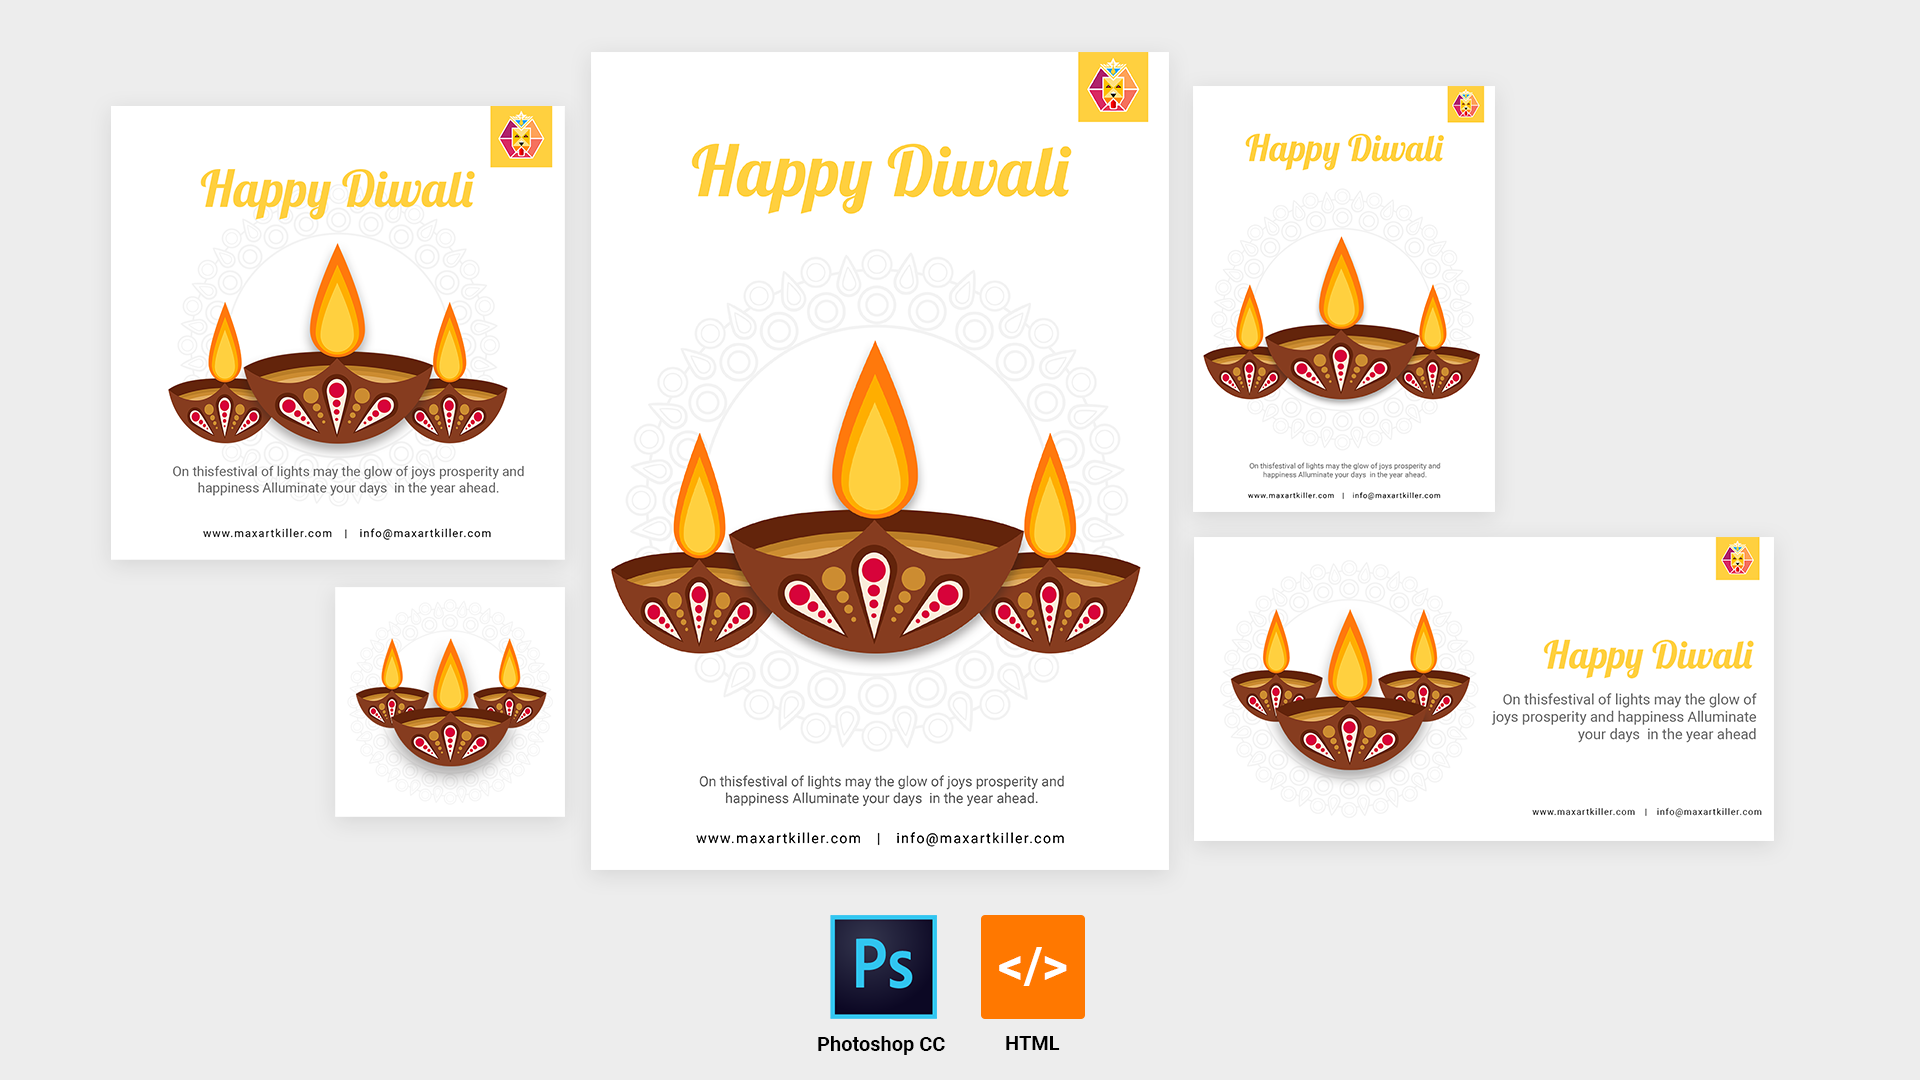 100+ Happy Diwali 2023 Wishes, Quotes, Messages, Images, and GIFs |  SocialStatusDP.com